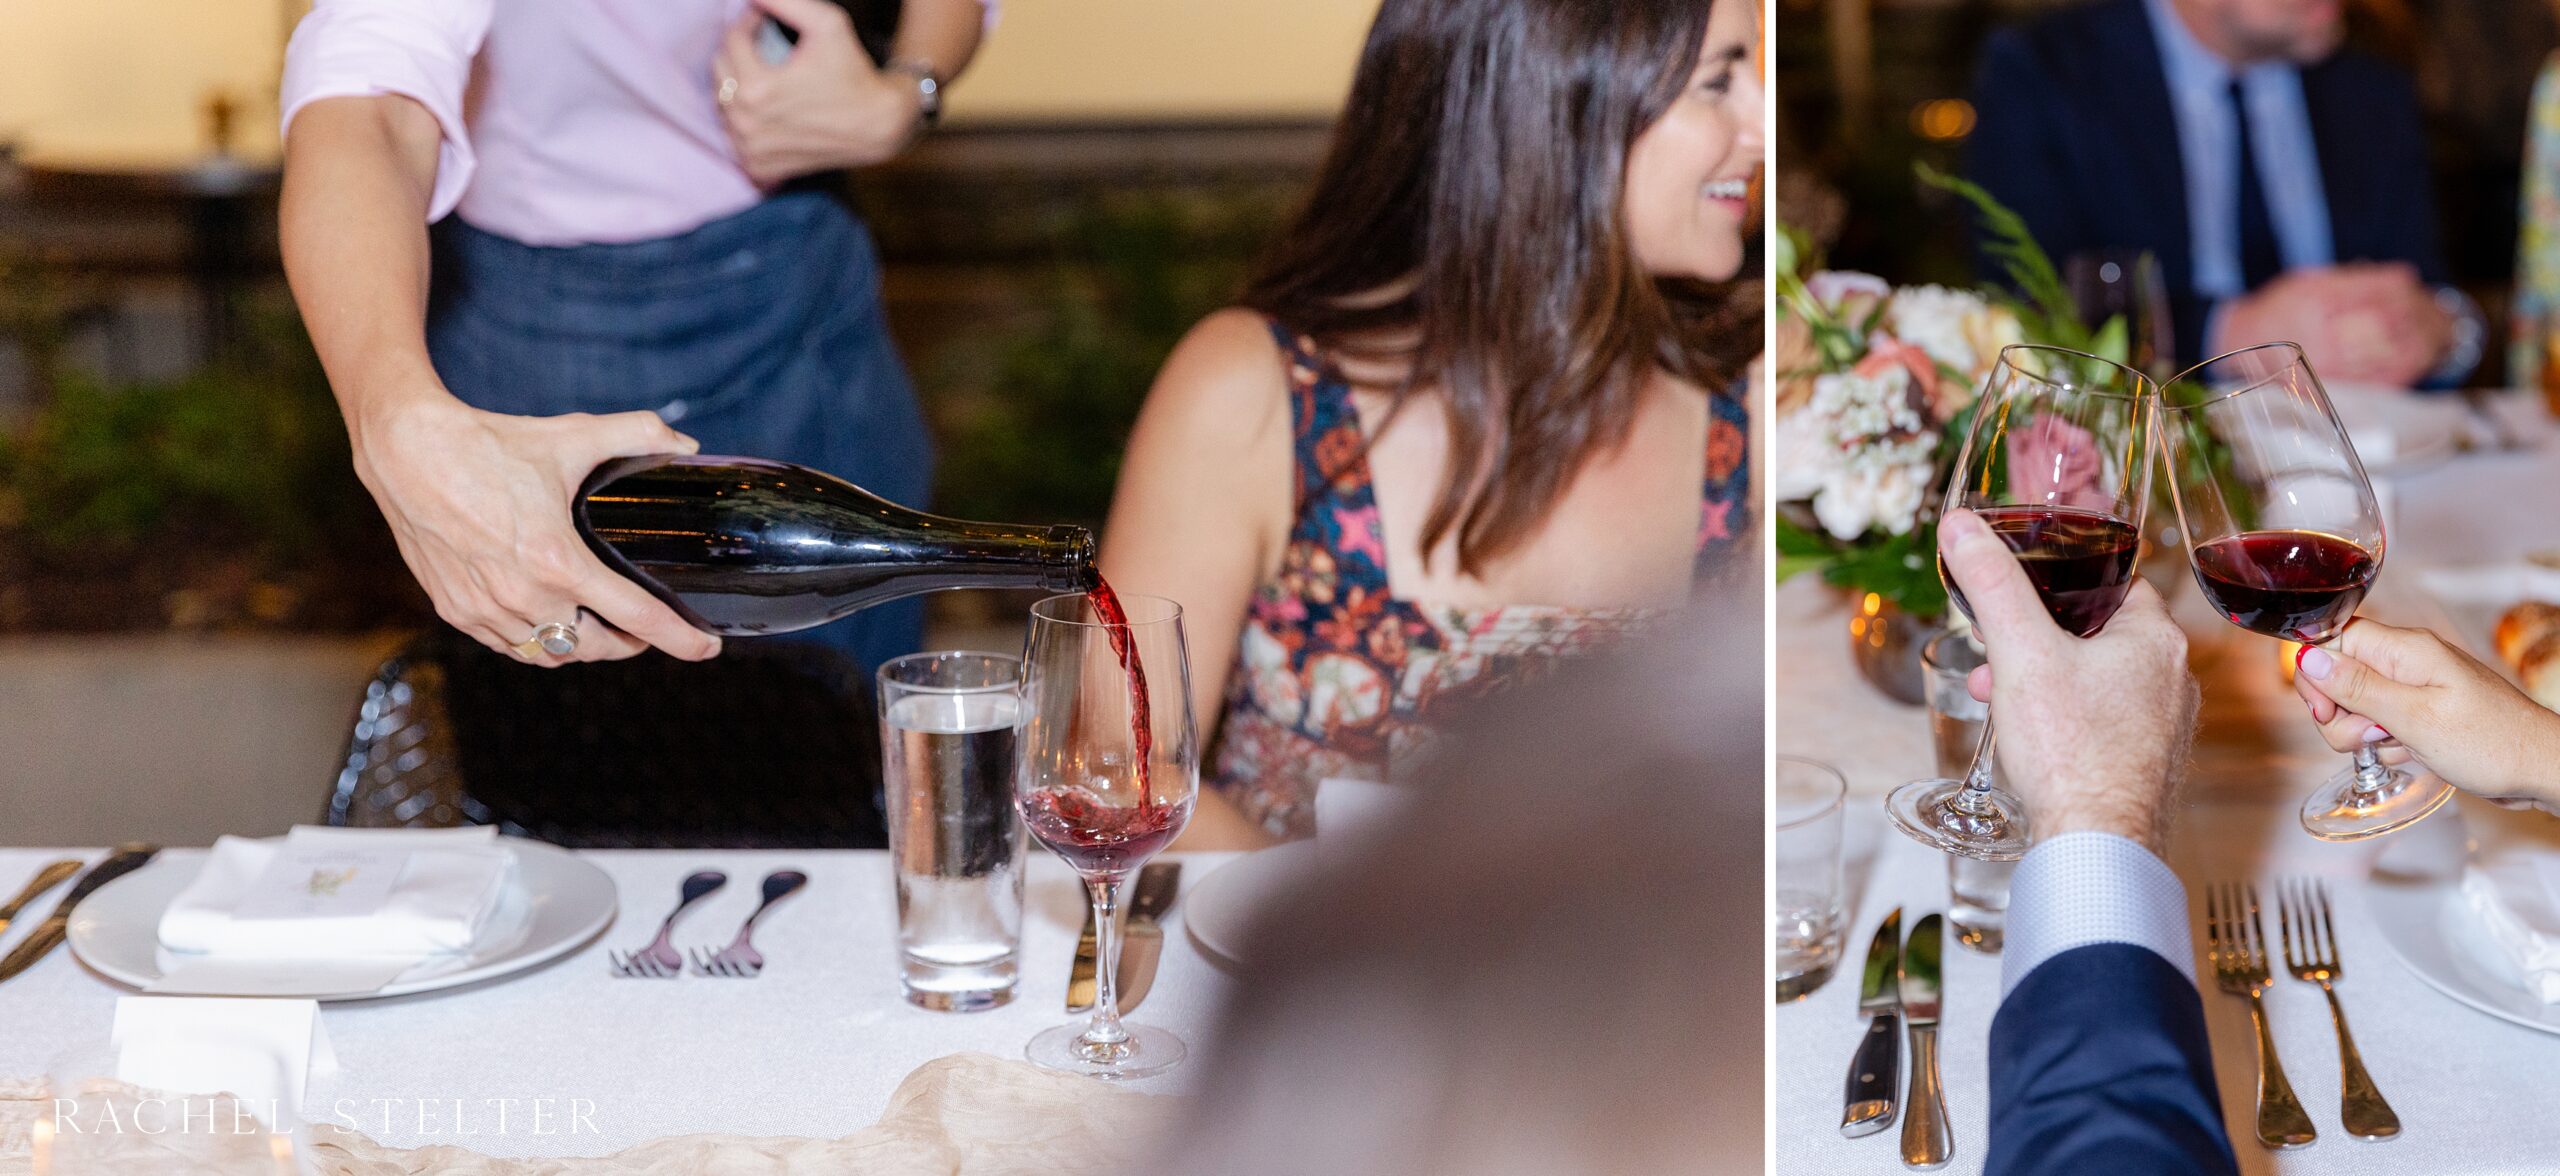 guests get served and toast to the bride and groom with red wine